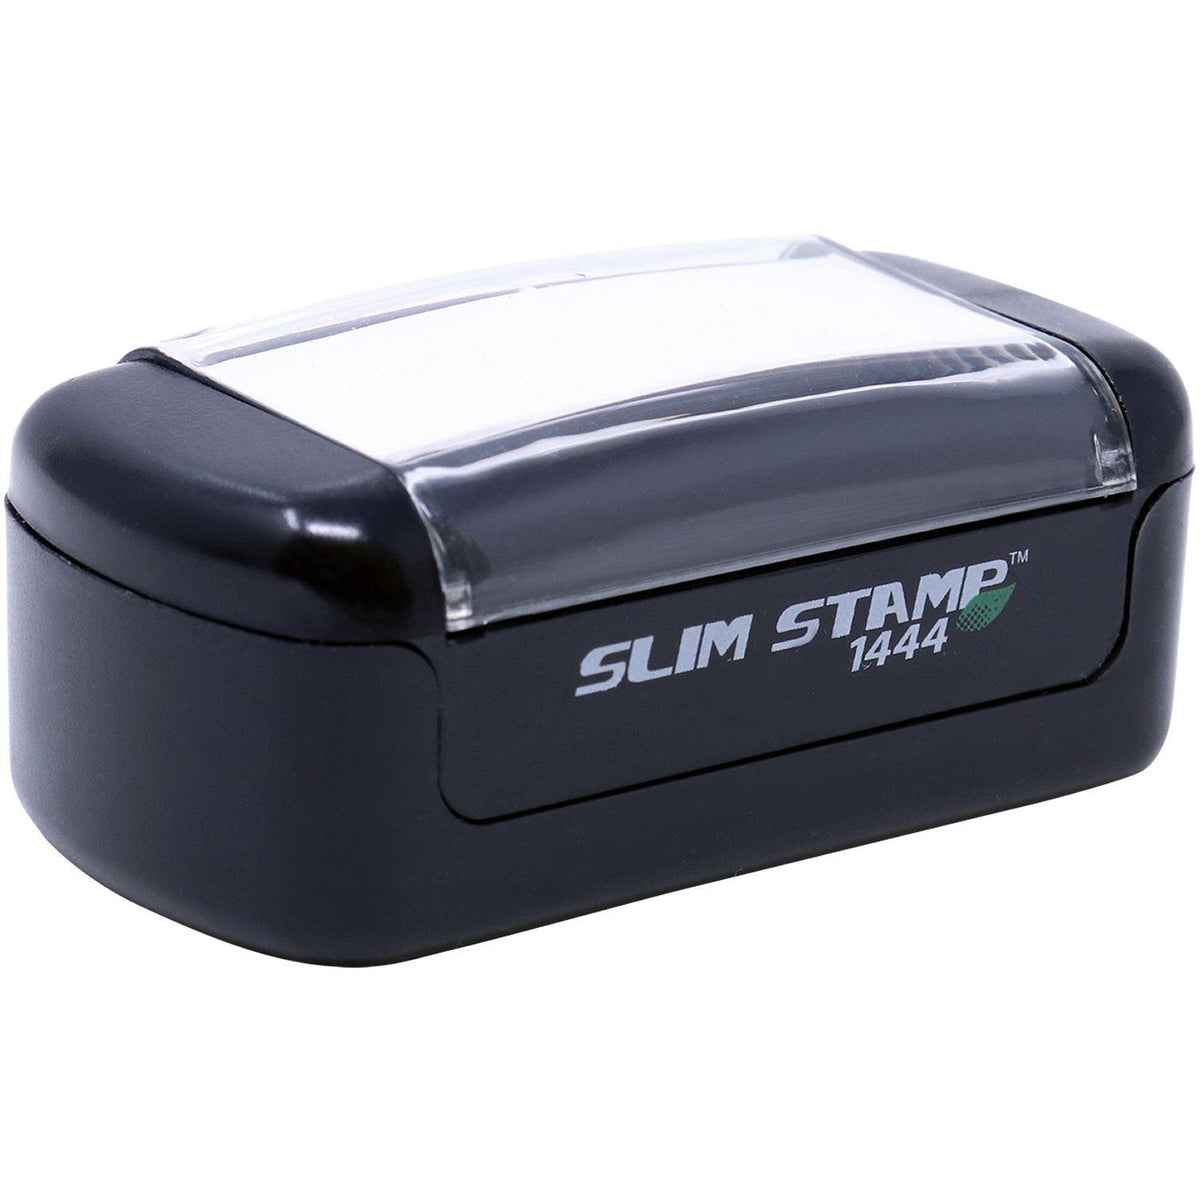 Alt View of Slim Pre Inked Secure Stamp Mount Angle